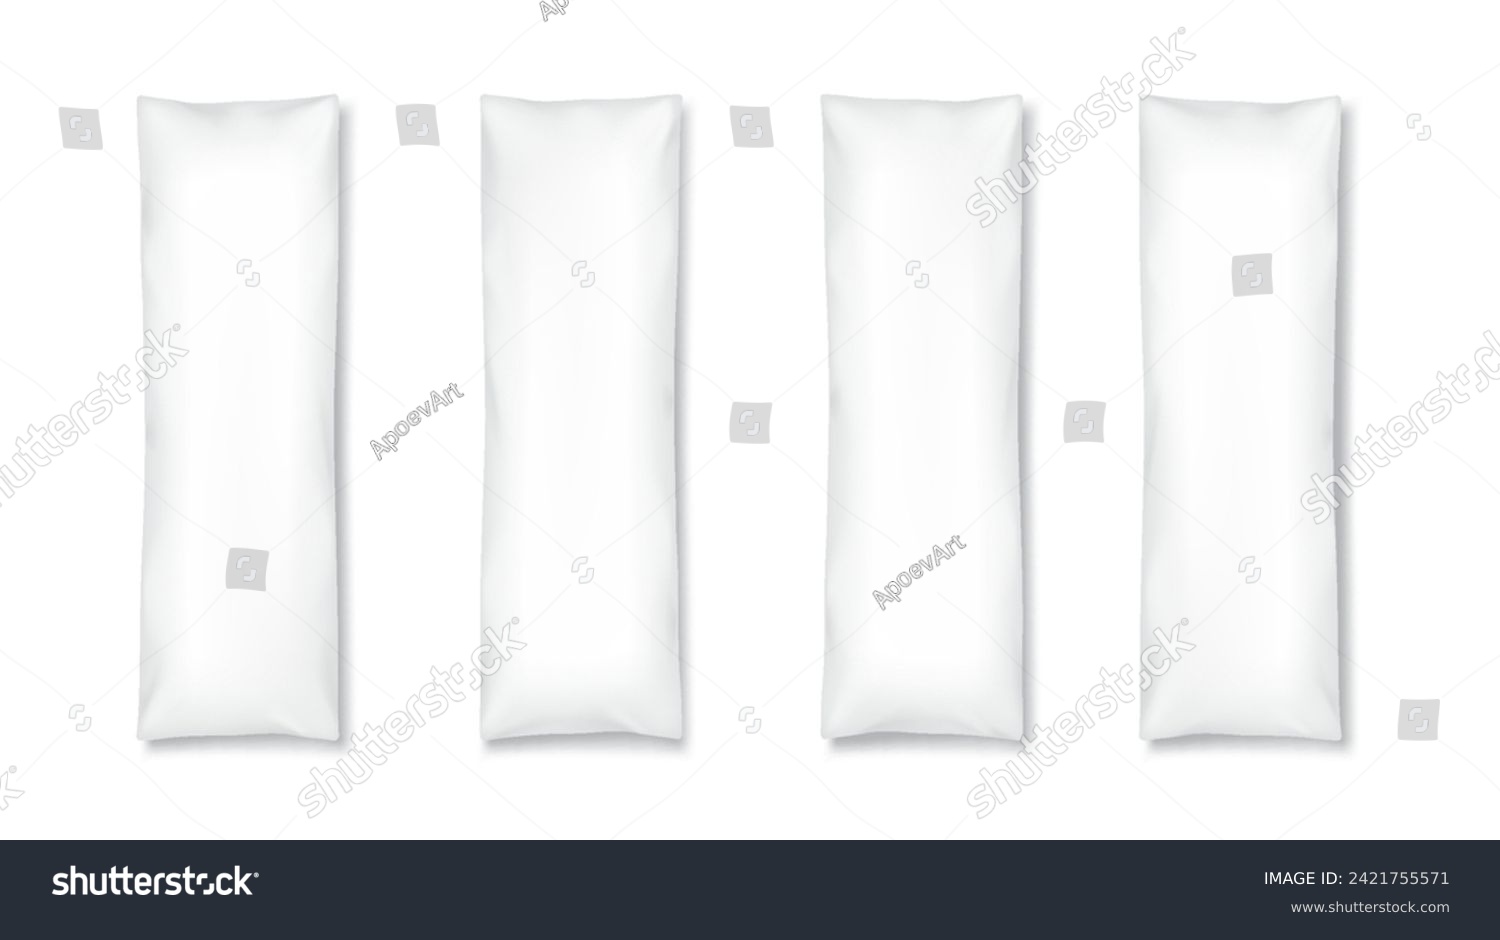 SVG of Rectangle mockup pillows realistic vector illustration set. Long cushions for sofa 3d models on white background. Home comfort items. 